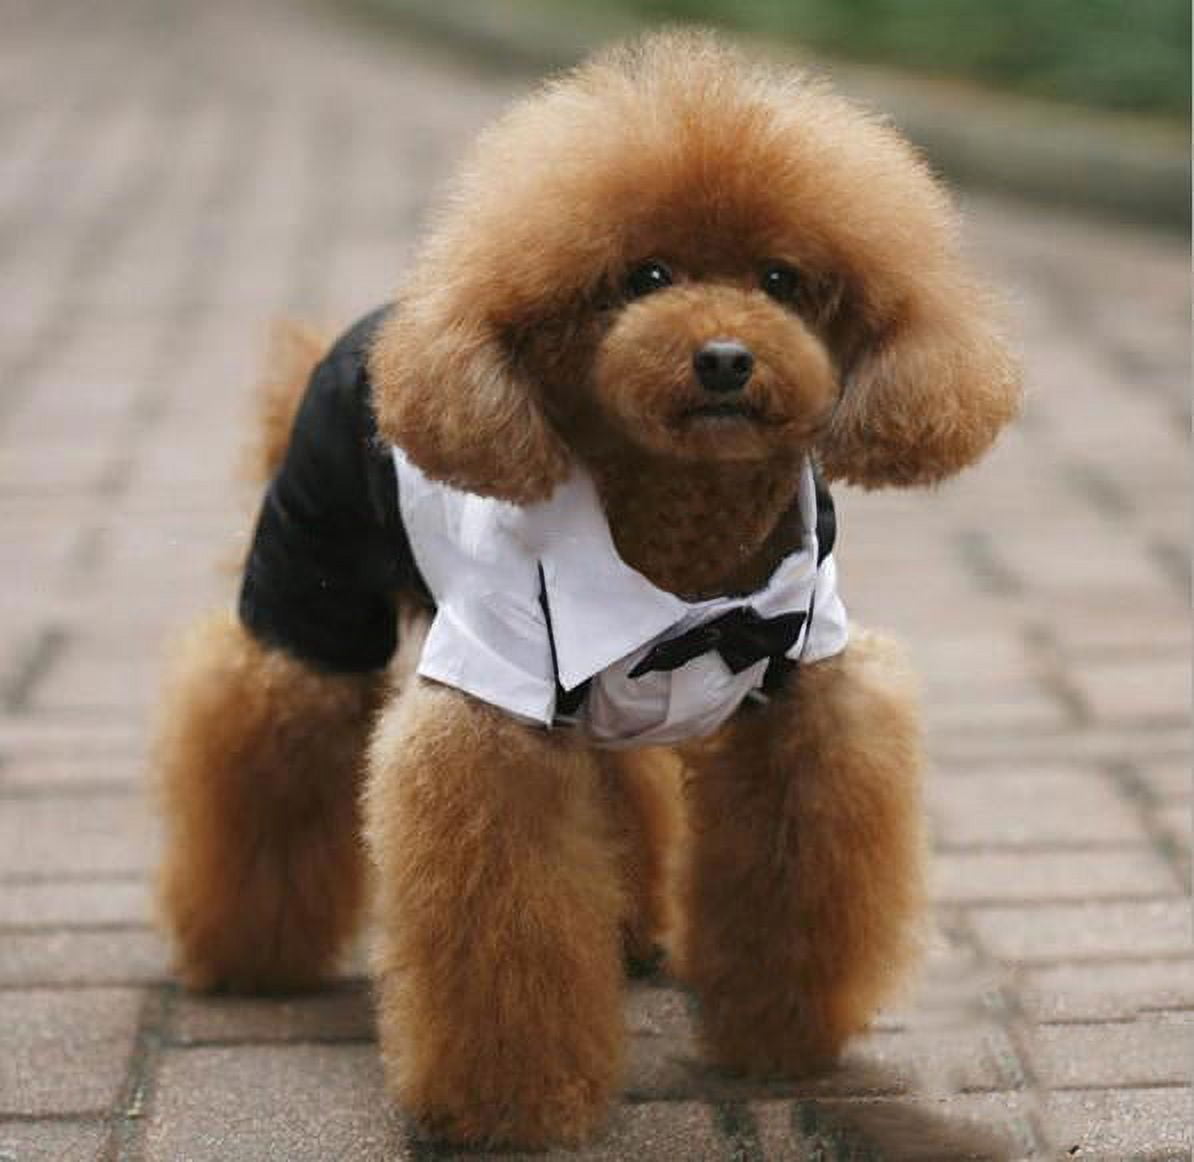  NOLITOY Puppy Outfits Small Dog Outfits pet Dog Costume Dog  Clothes pet Bow tie Suit pet Apparel Dog's Clothes Clothing Dress Tuxedo :  Pet Supplies